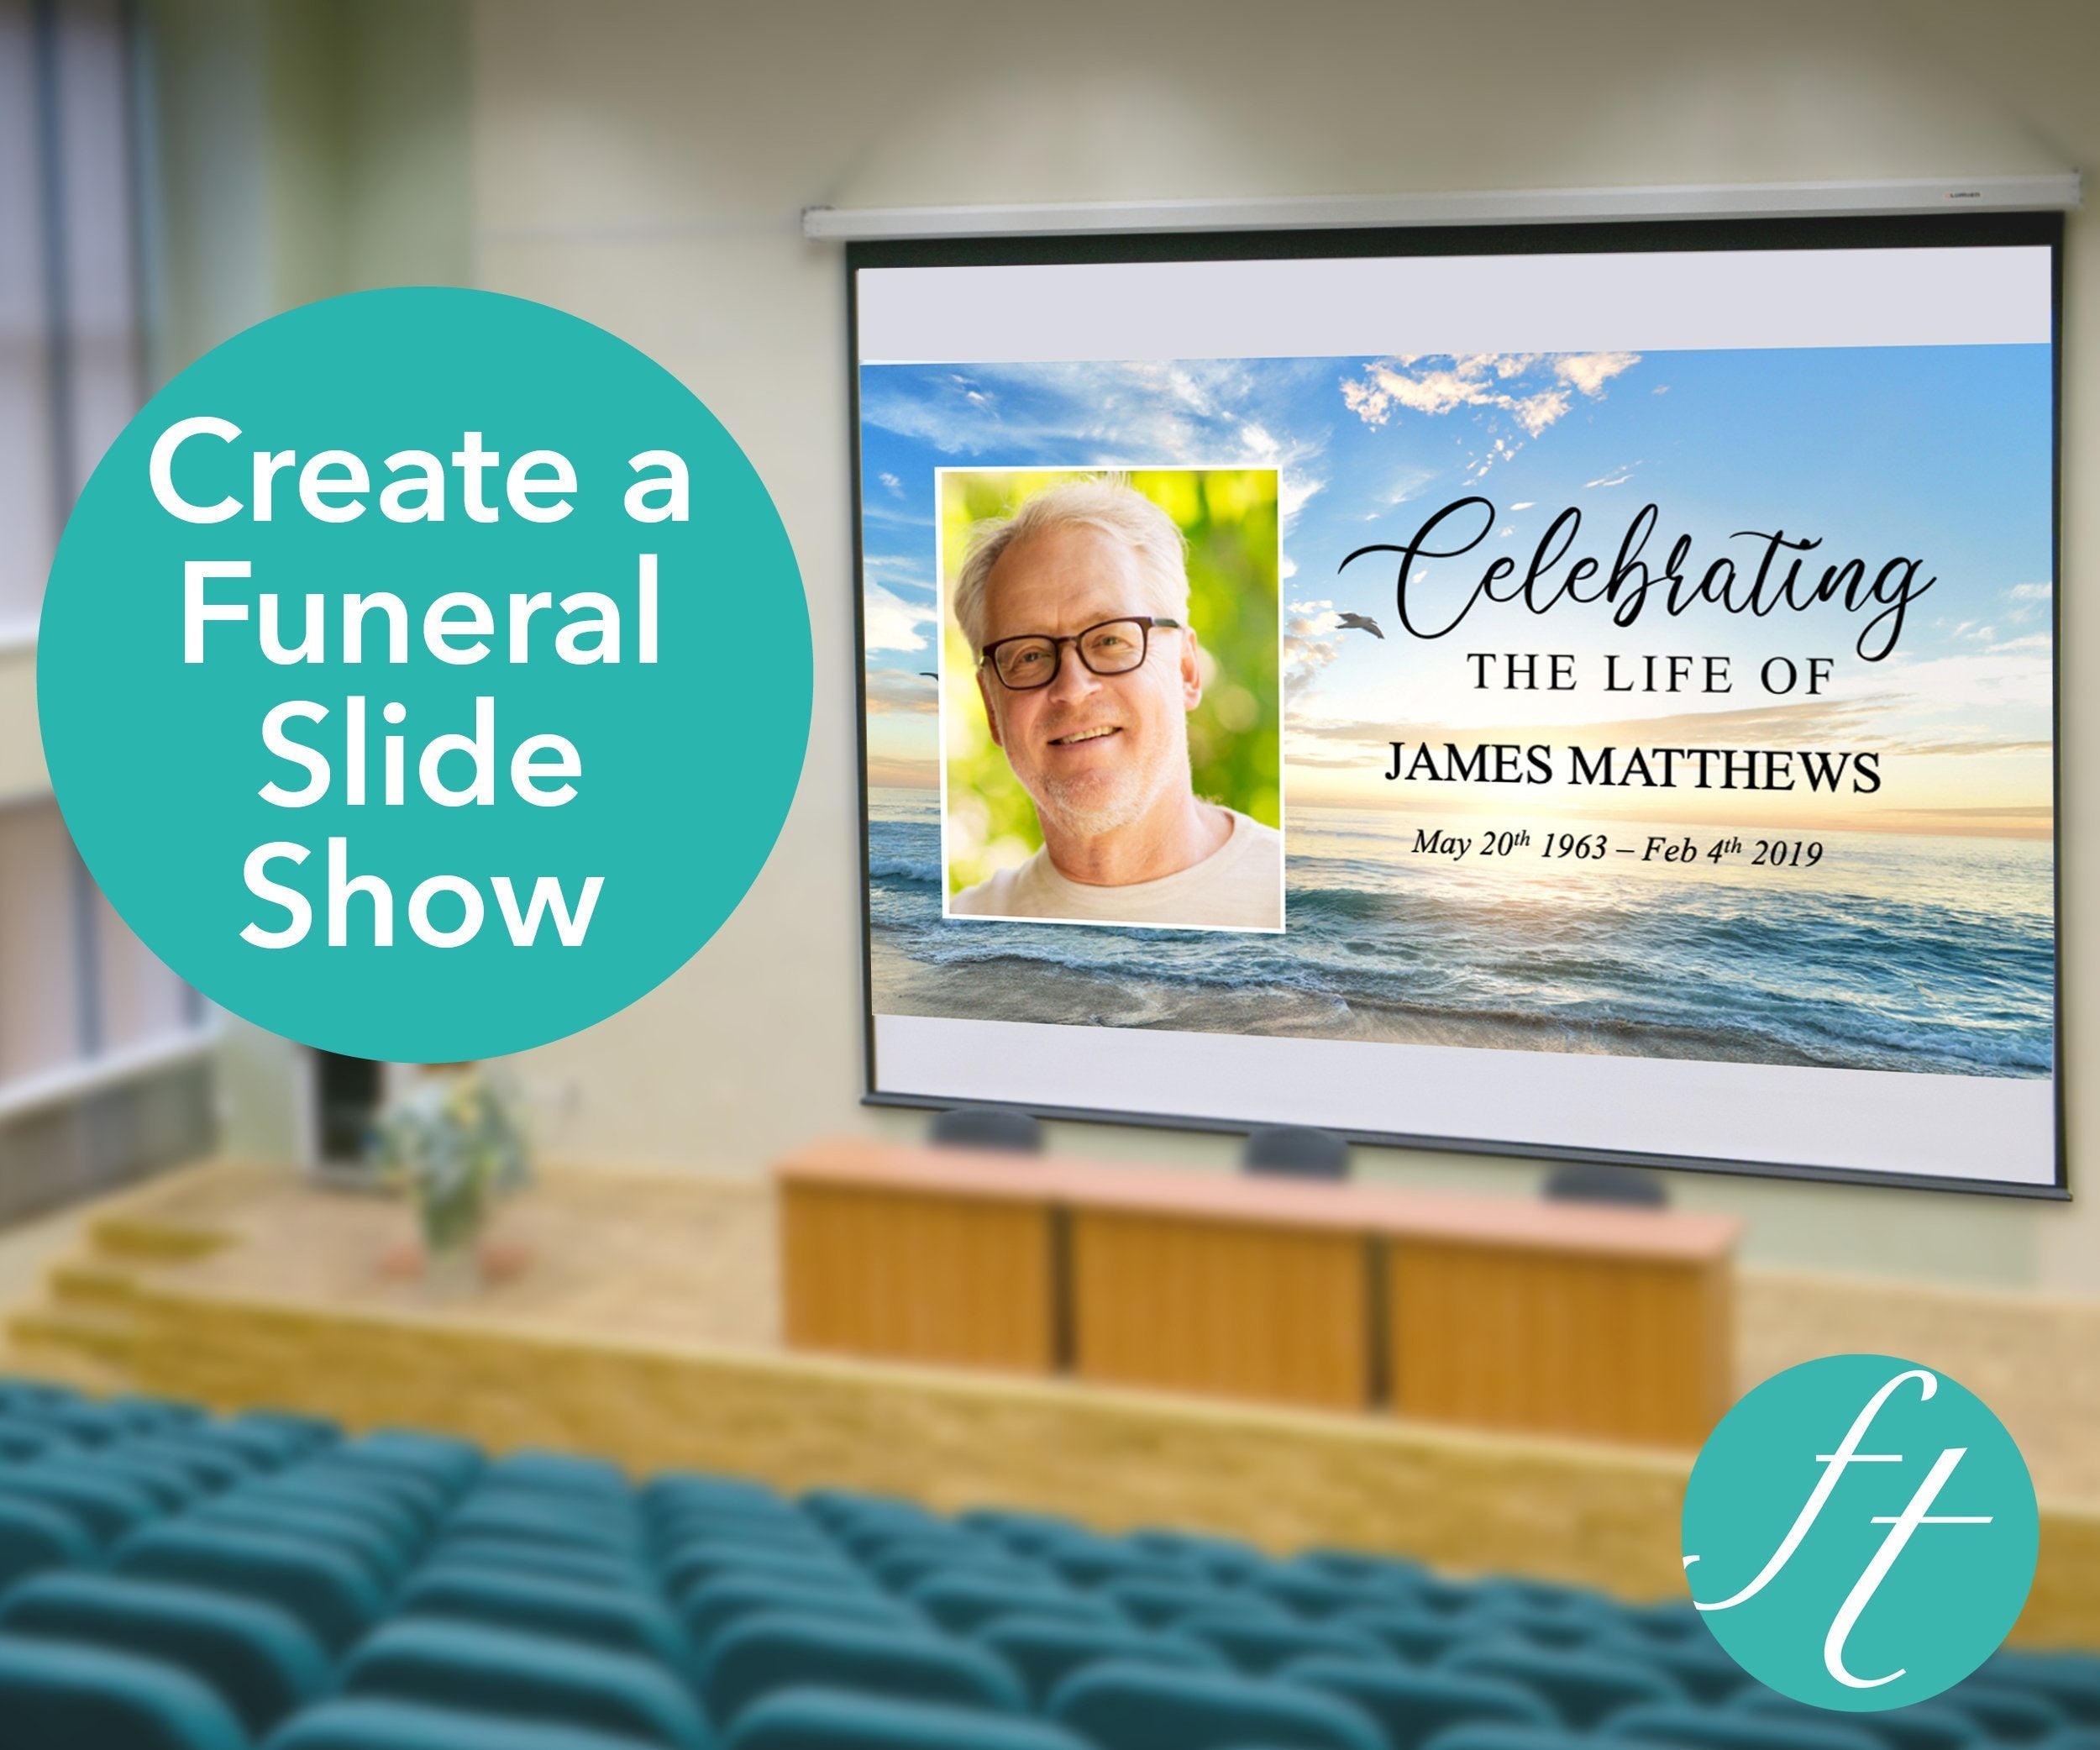 funeral powerpoint templates